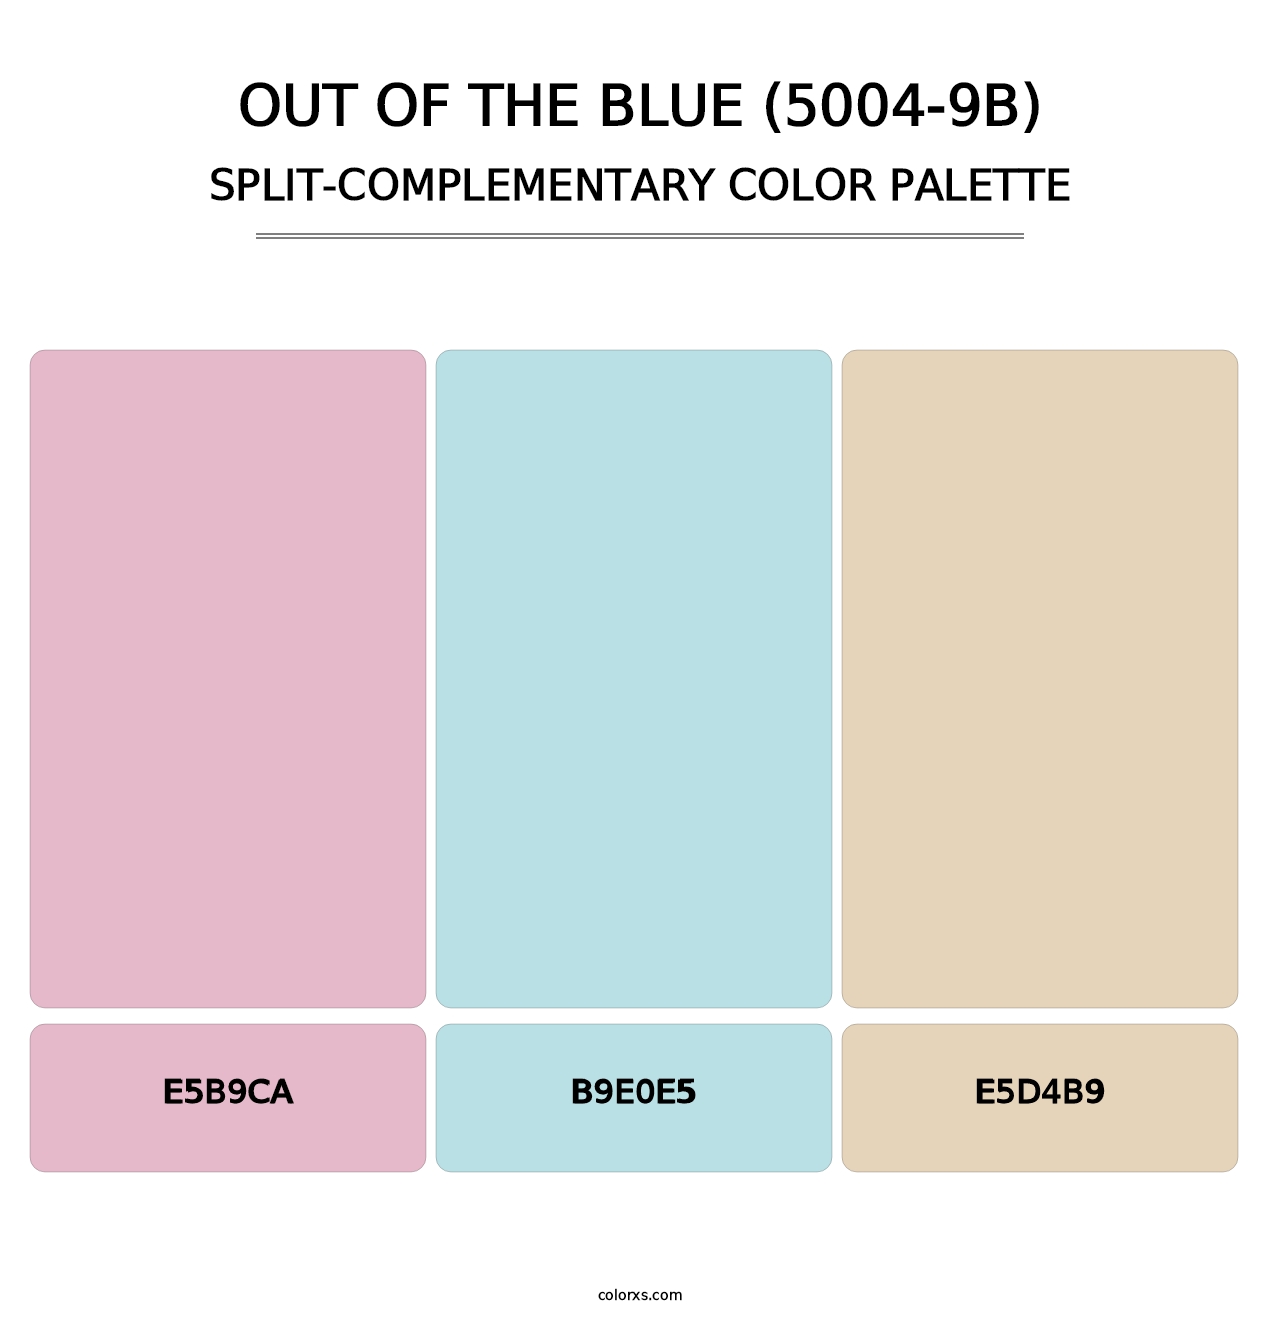 Out of the Blue (5004-9B) - Split-Complementary Color Palette